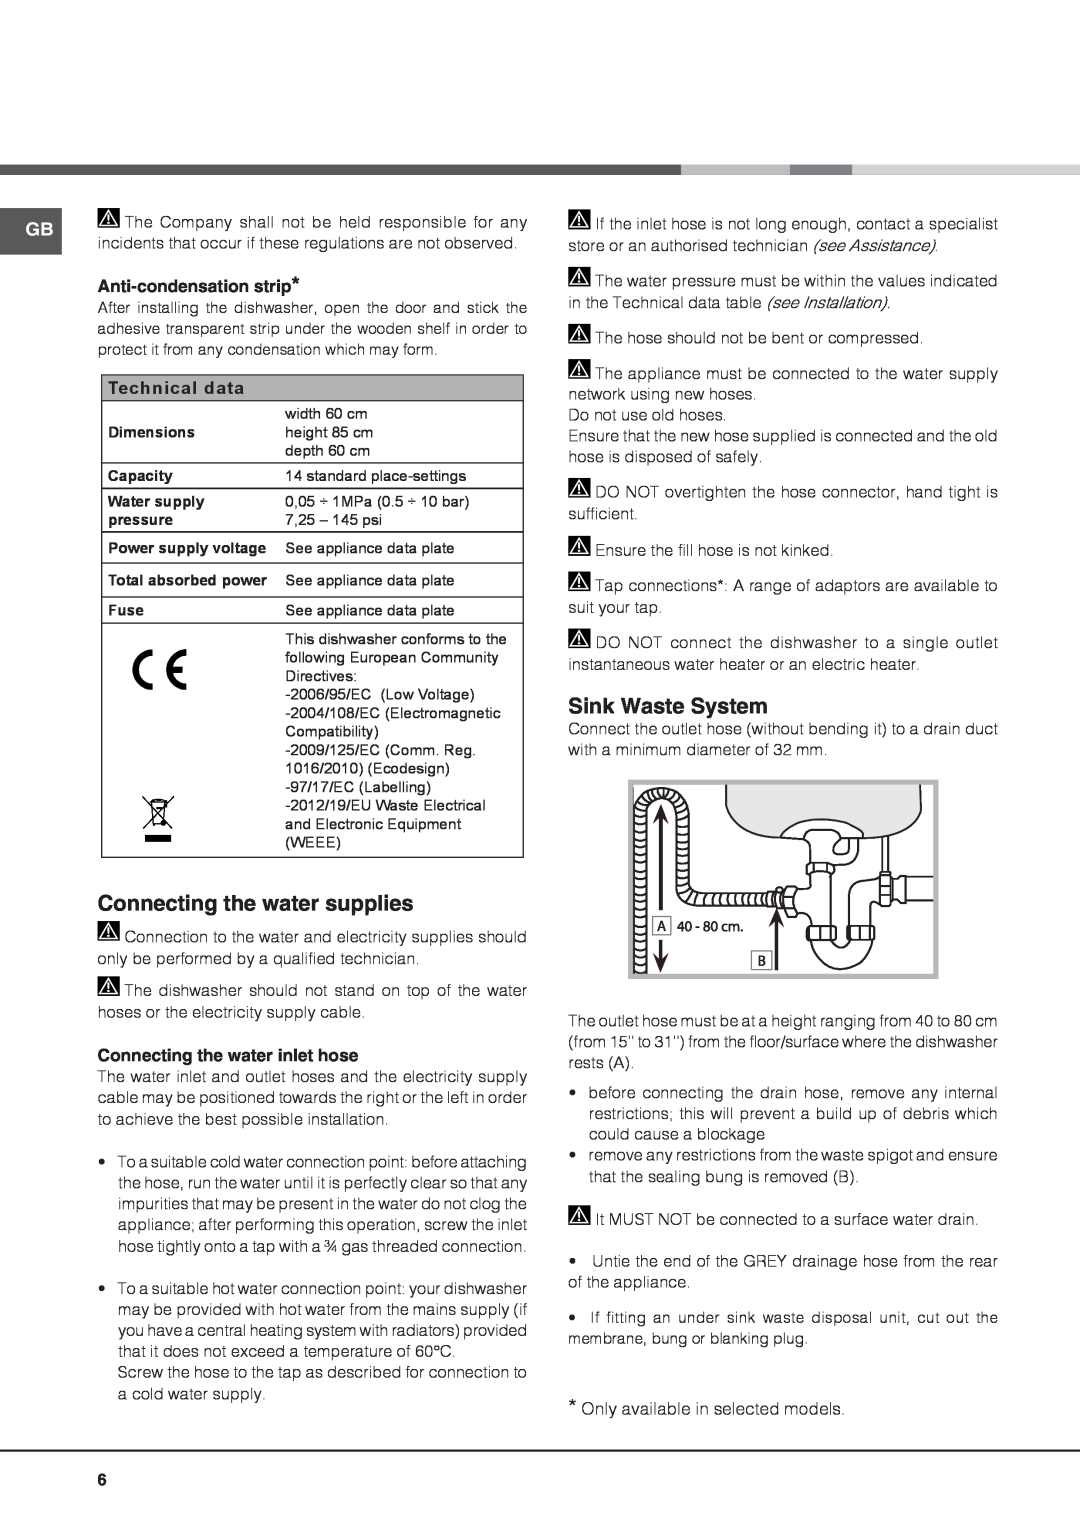 Hotpoint FDLET 31020 manual Connecting the water supplies, Sink Waste System, Anti-condensation strip, Technical data 